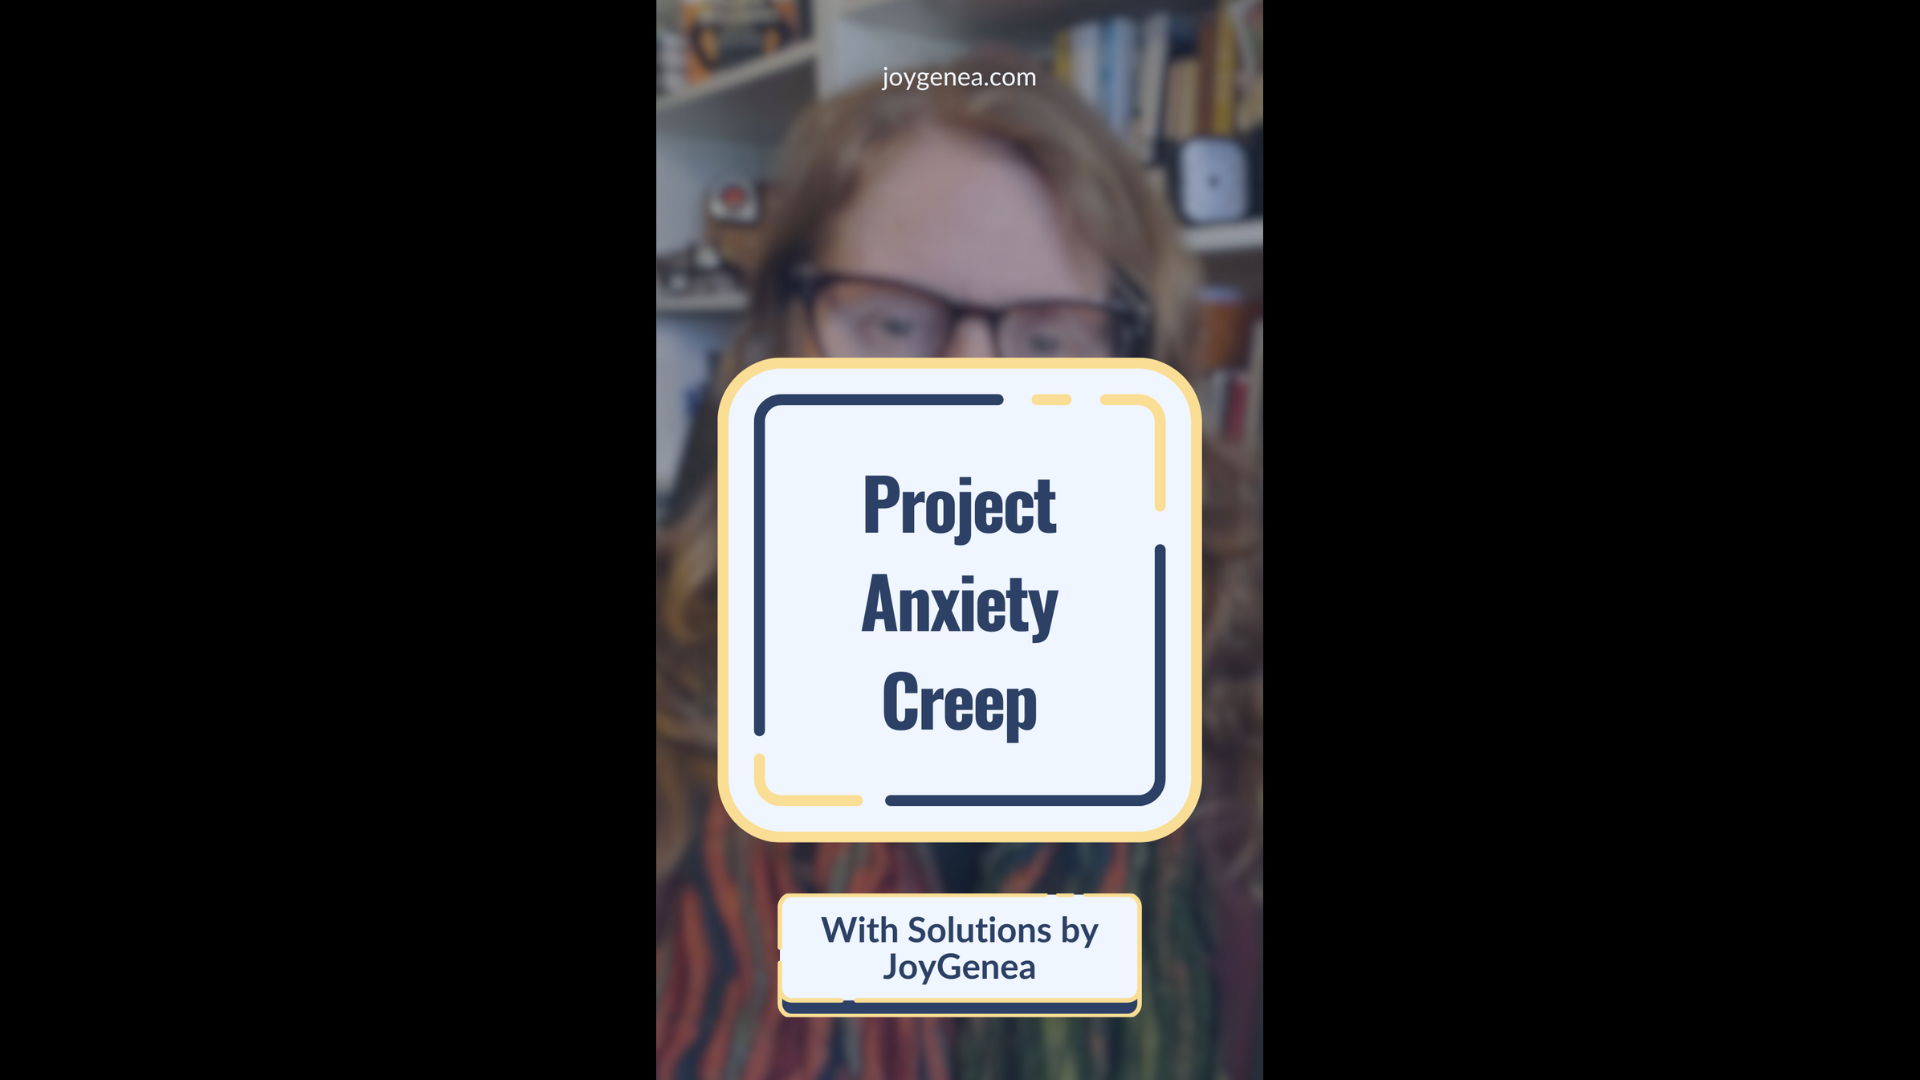 Featured image for “Project Anxiety Creep”